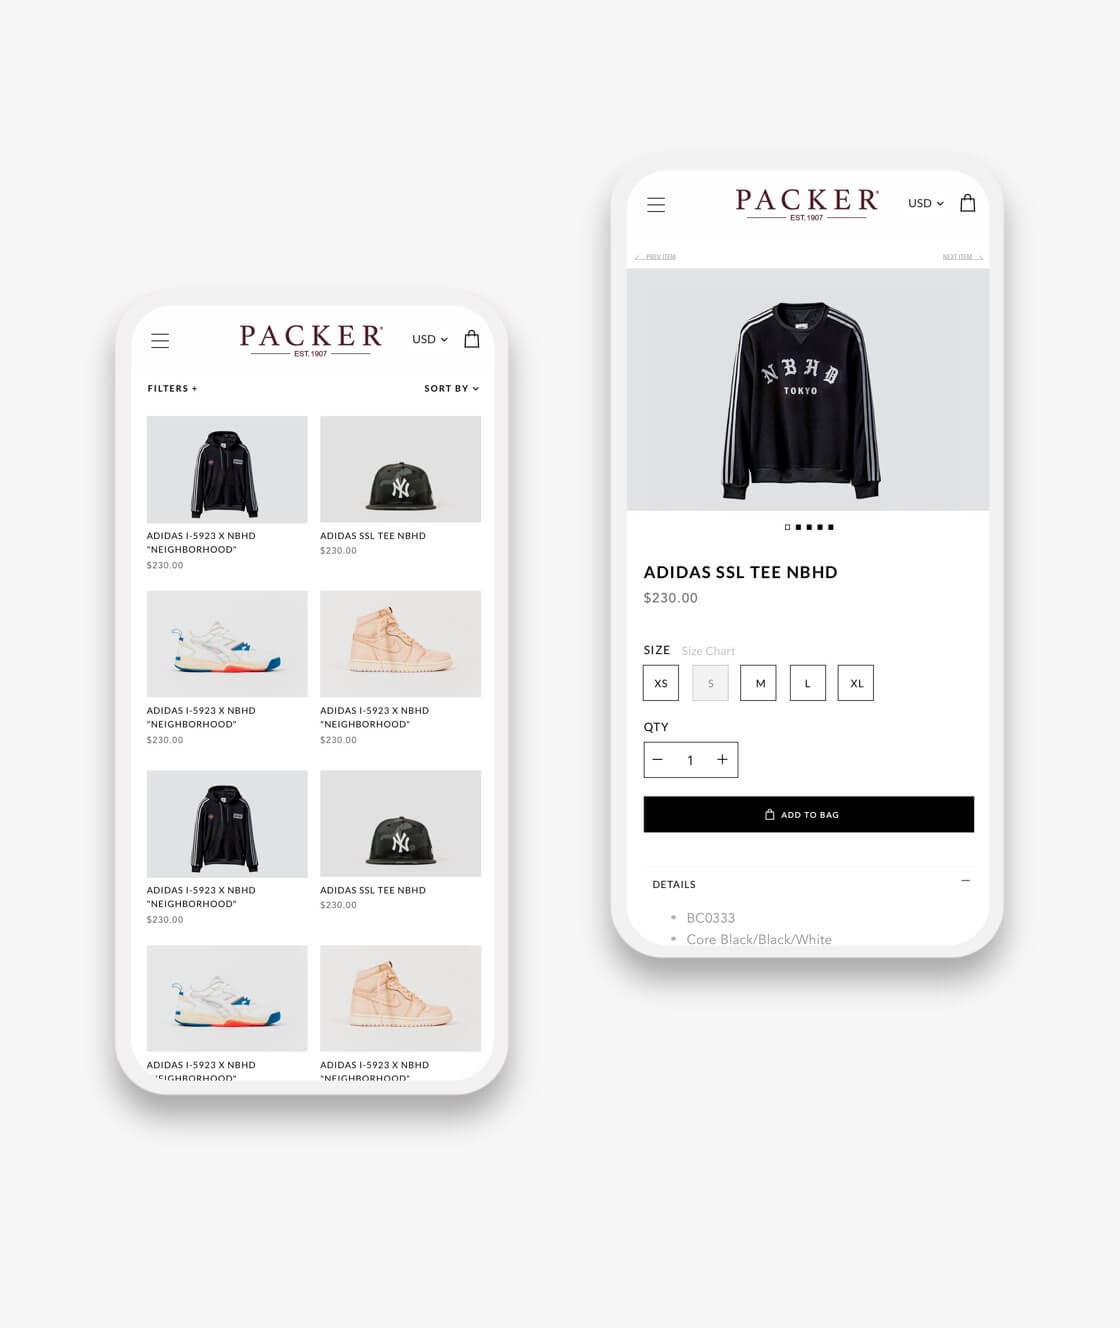 packer website product and collection pages on smartphones